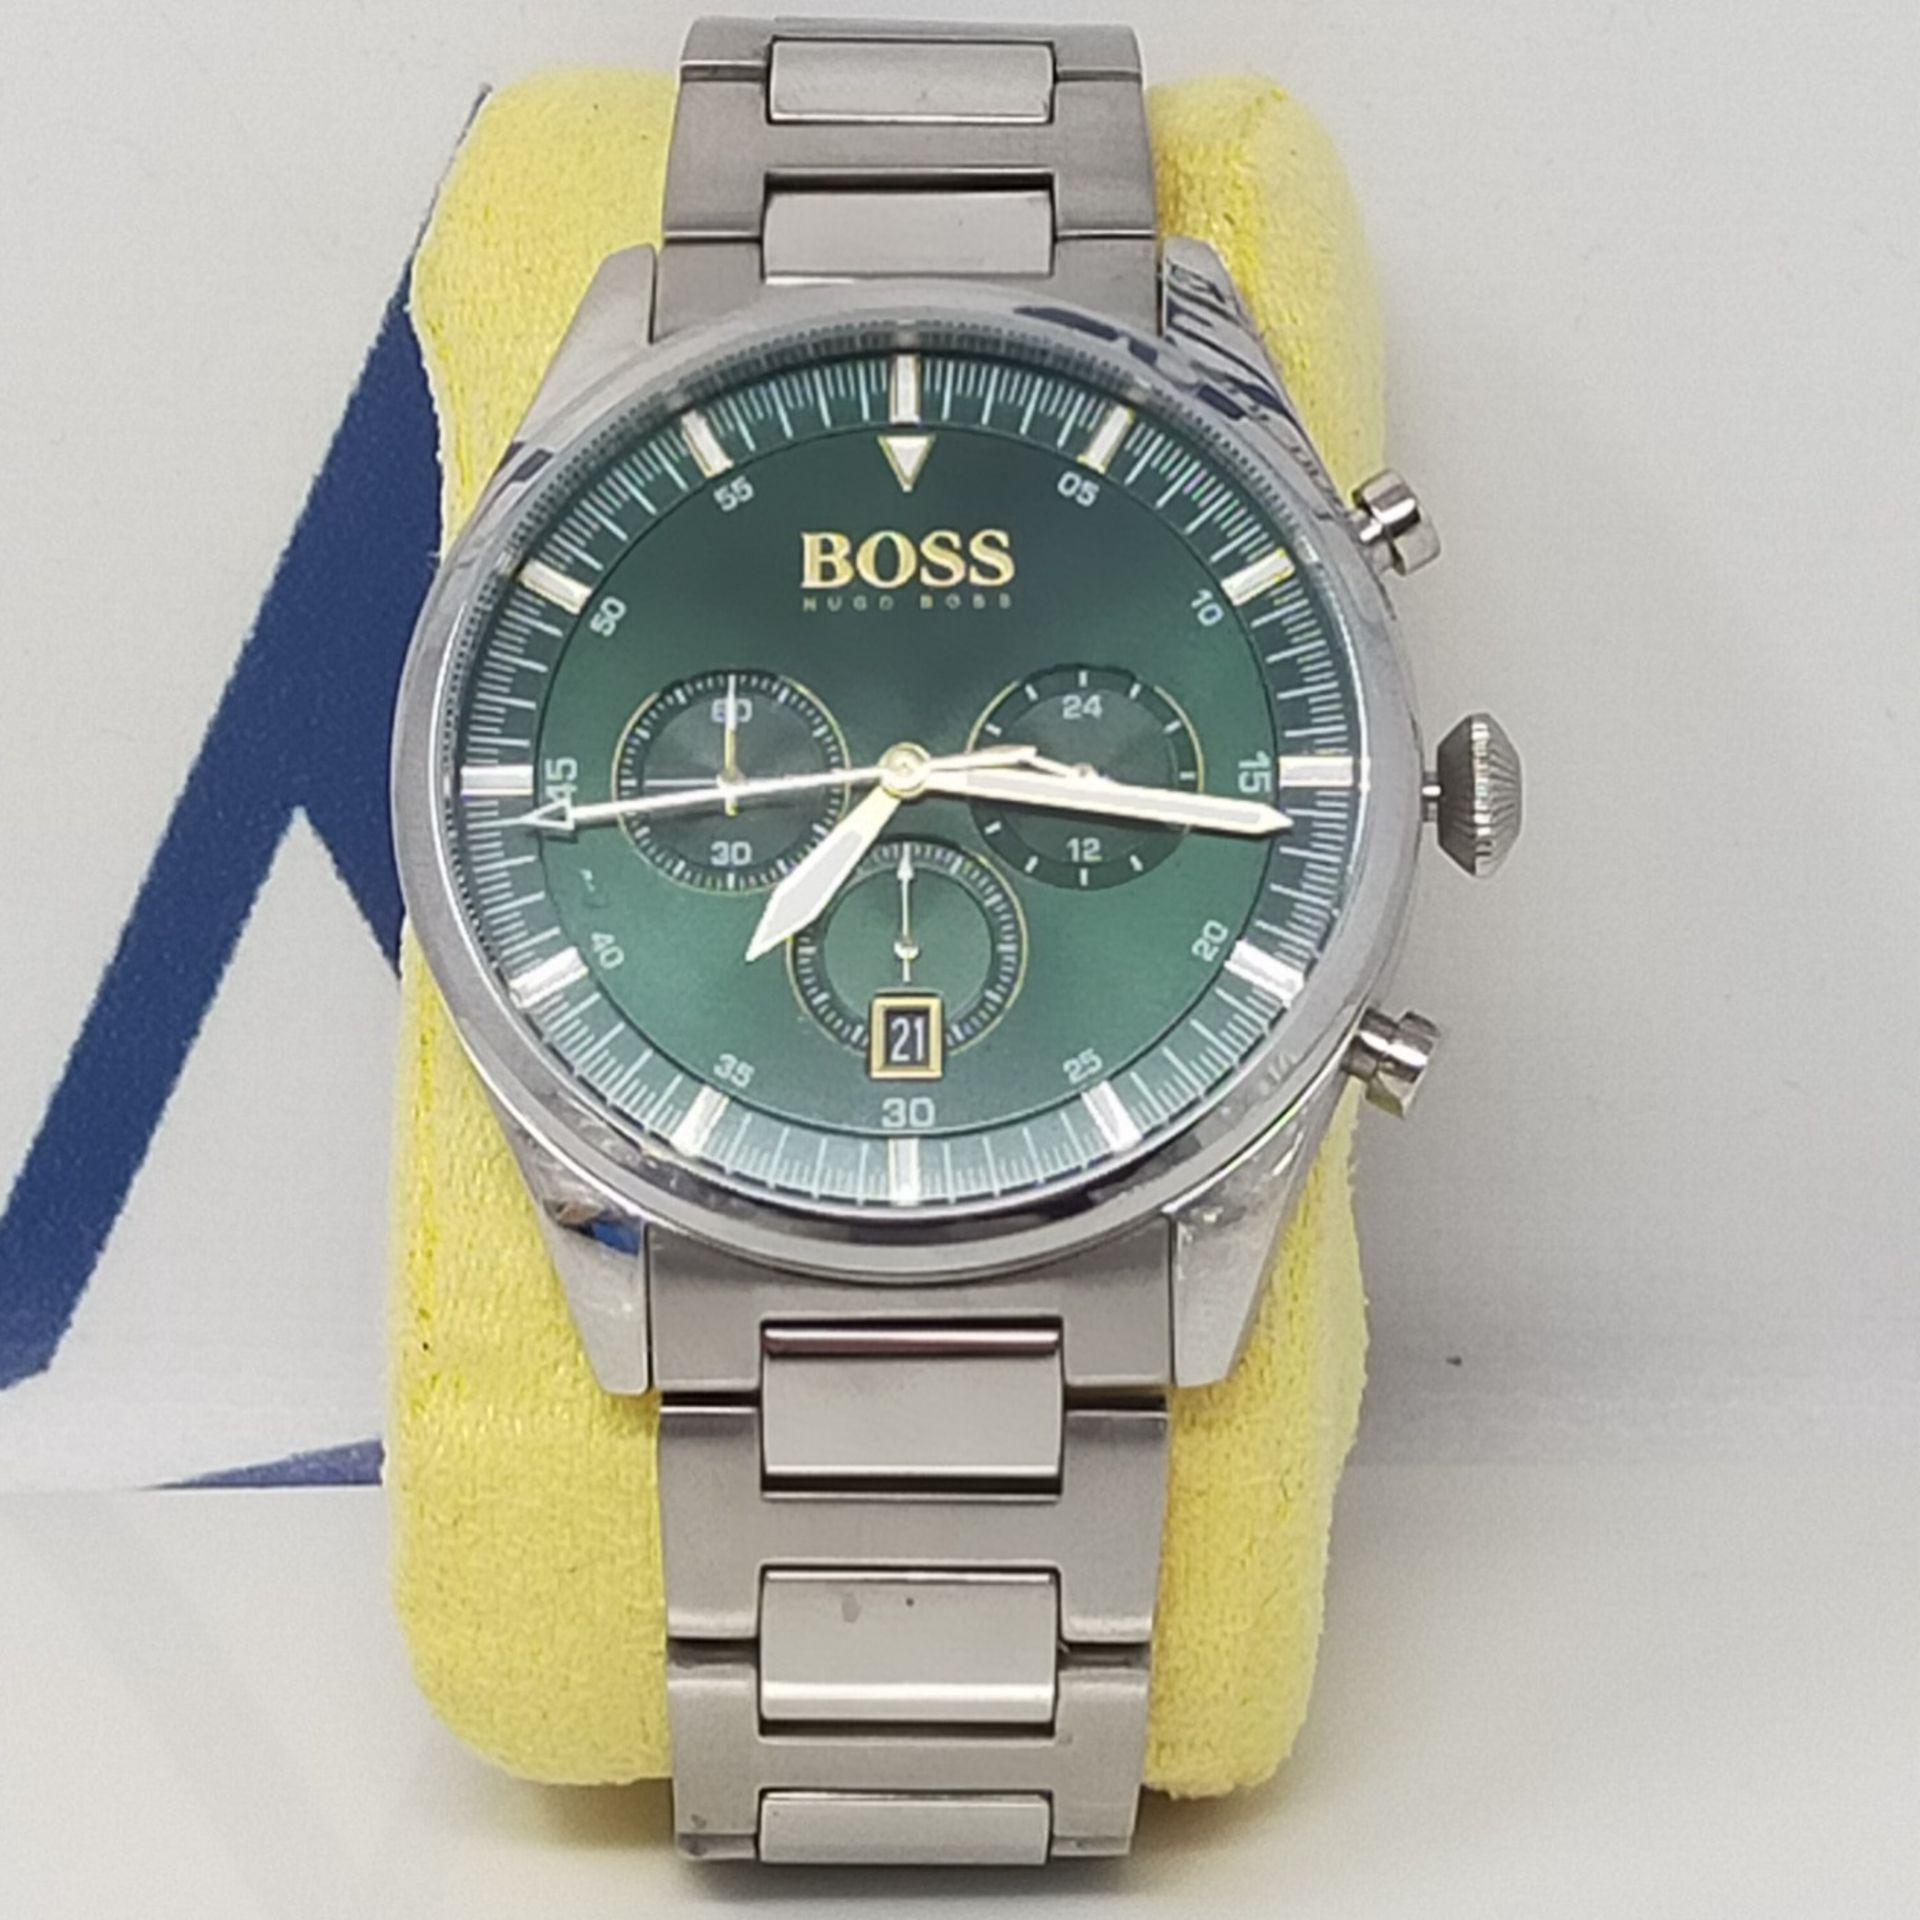 RRP £273.00 BOSS Men's Analog Quartz Watch with Stainless Steel Strap 1513868 - Image 6 of 6